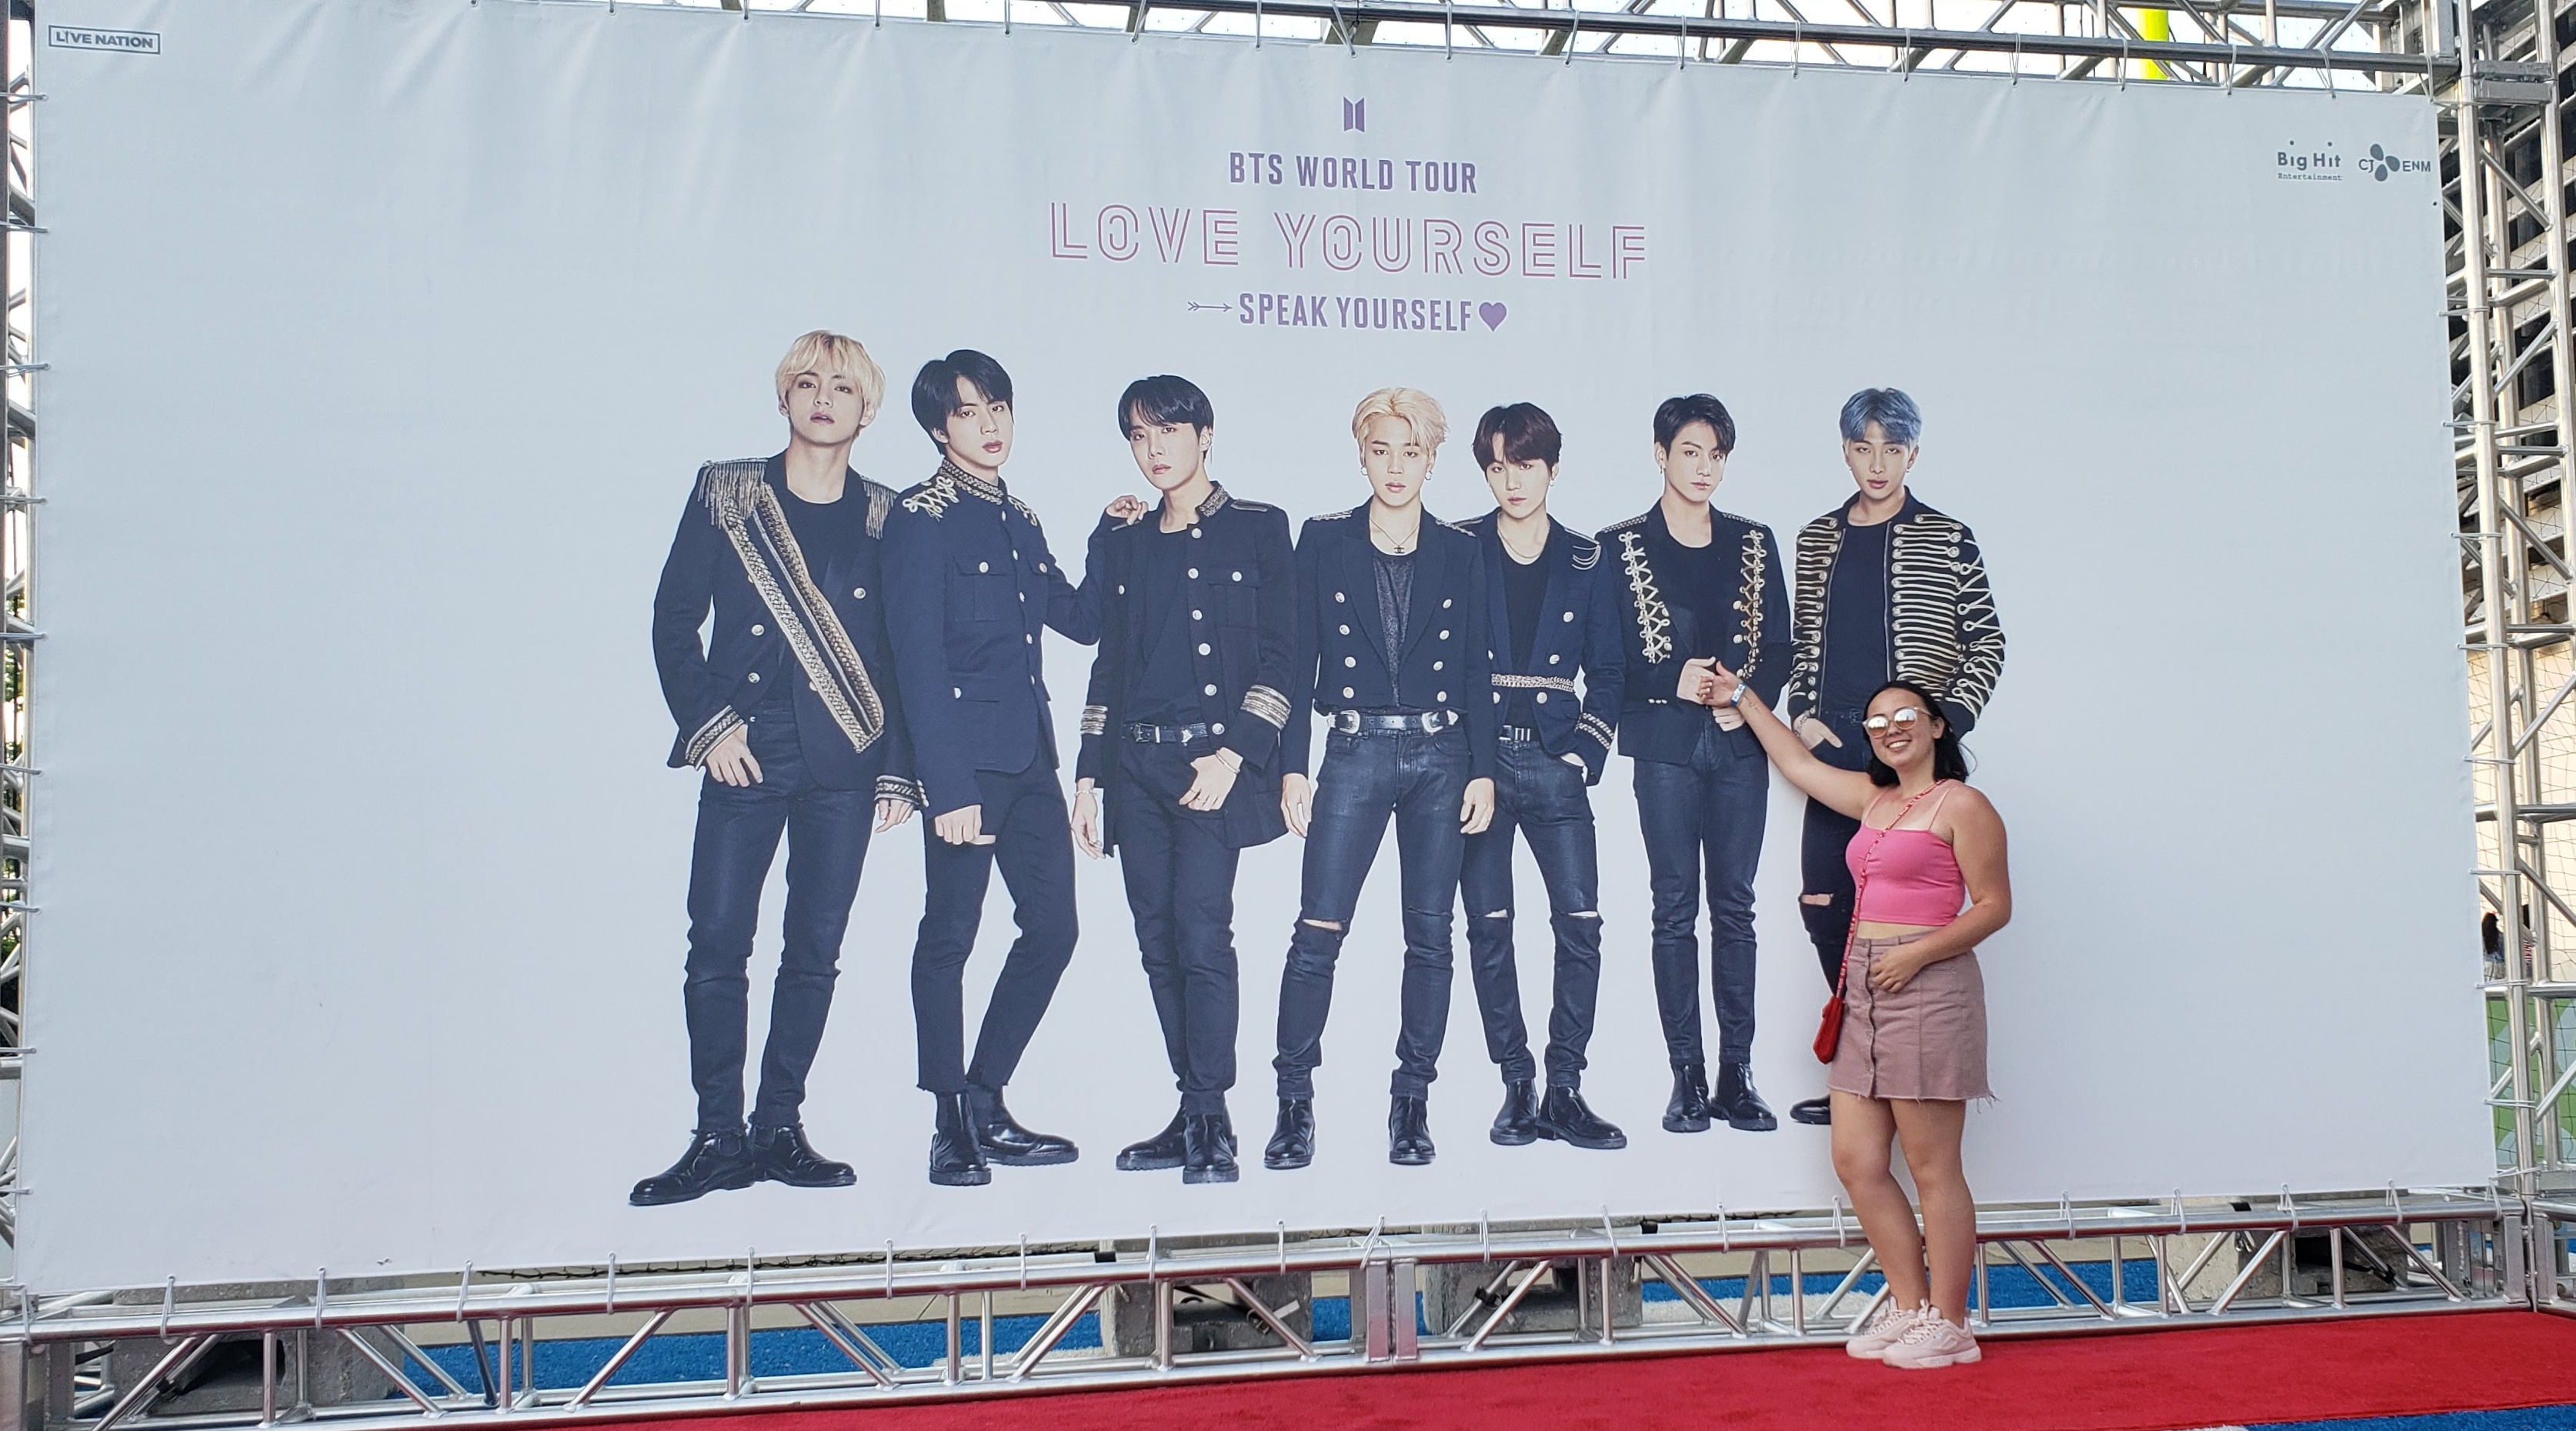 Marley Yu, an ARMY, taking photos at a BTS concert. She is wearing a pink crop top and a skirt while pointing up to BTS member Jungkook. 